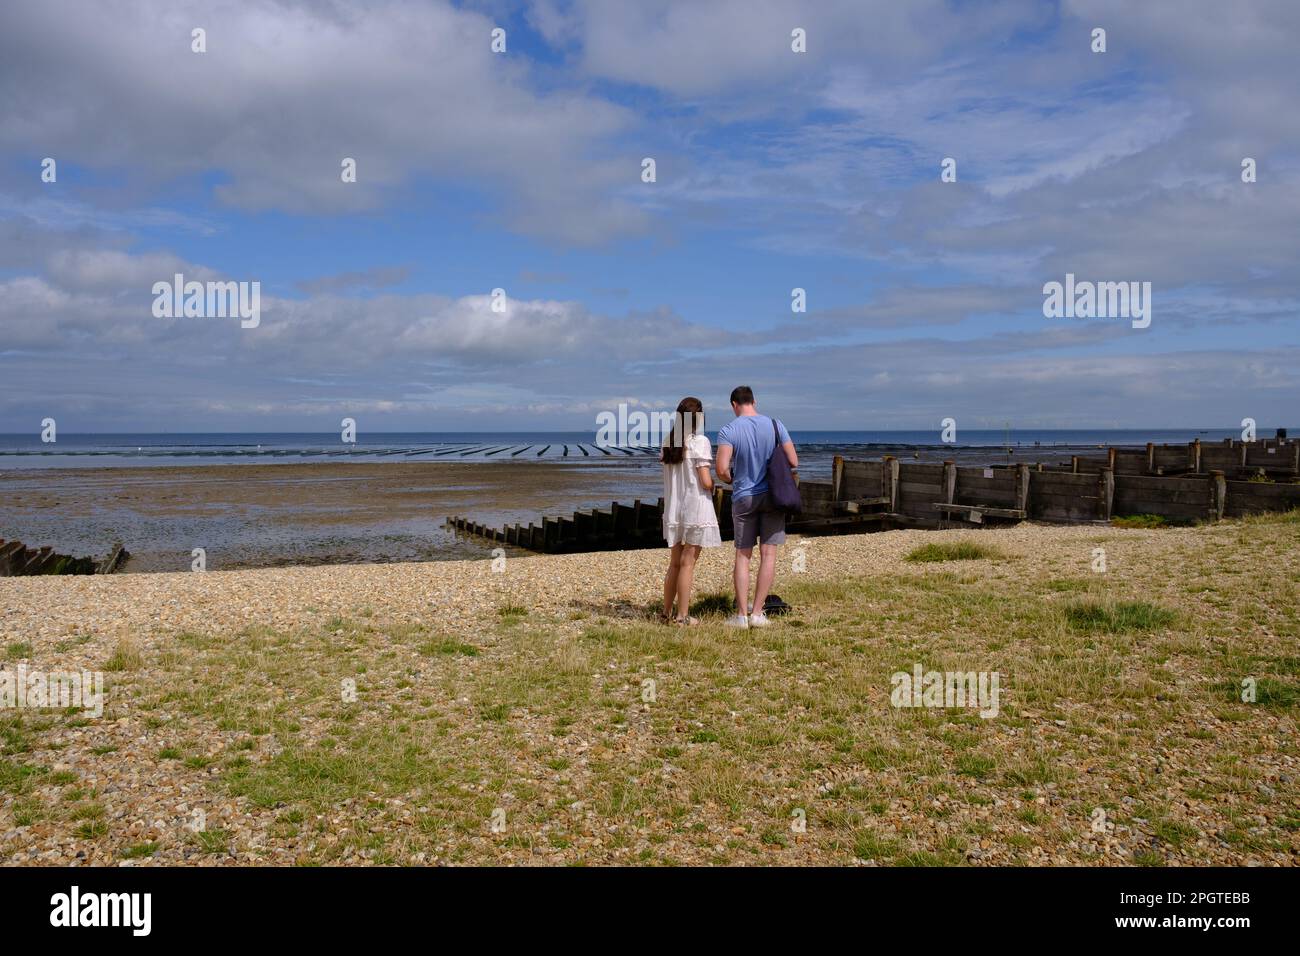 Man & woman stand on shingle beach looking out to sea next to Wooden groyne. Whitstable West Beach, north-east Kent coast, England, UK. Stock Photo